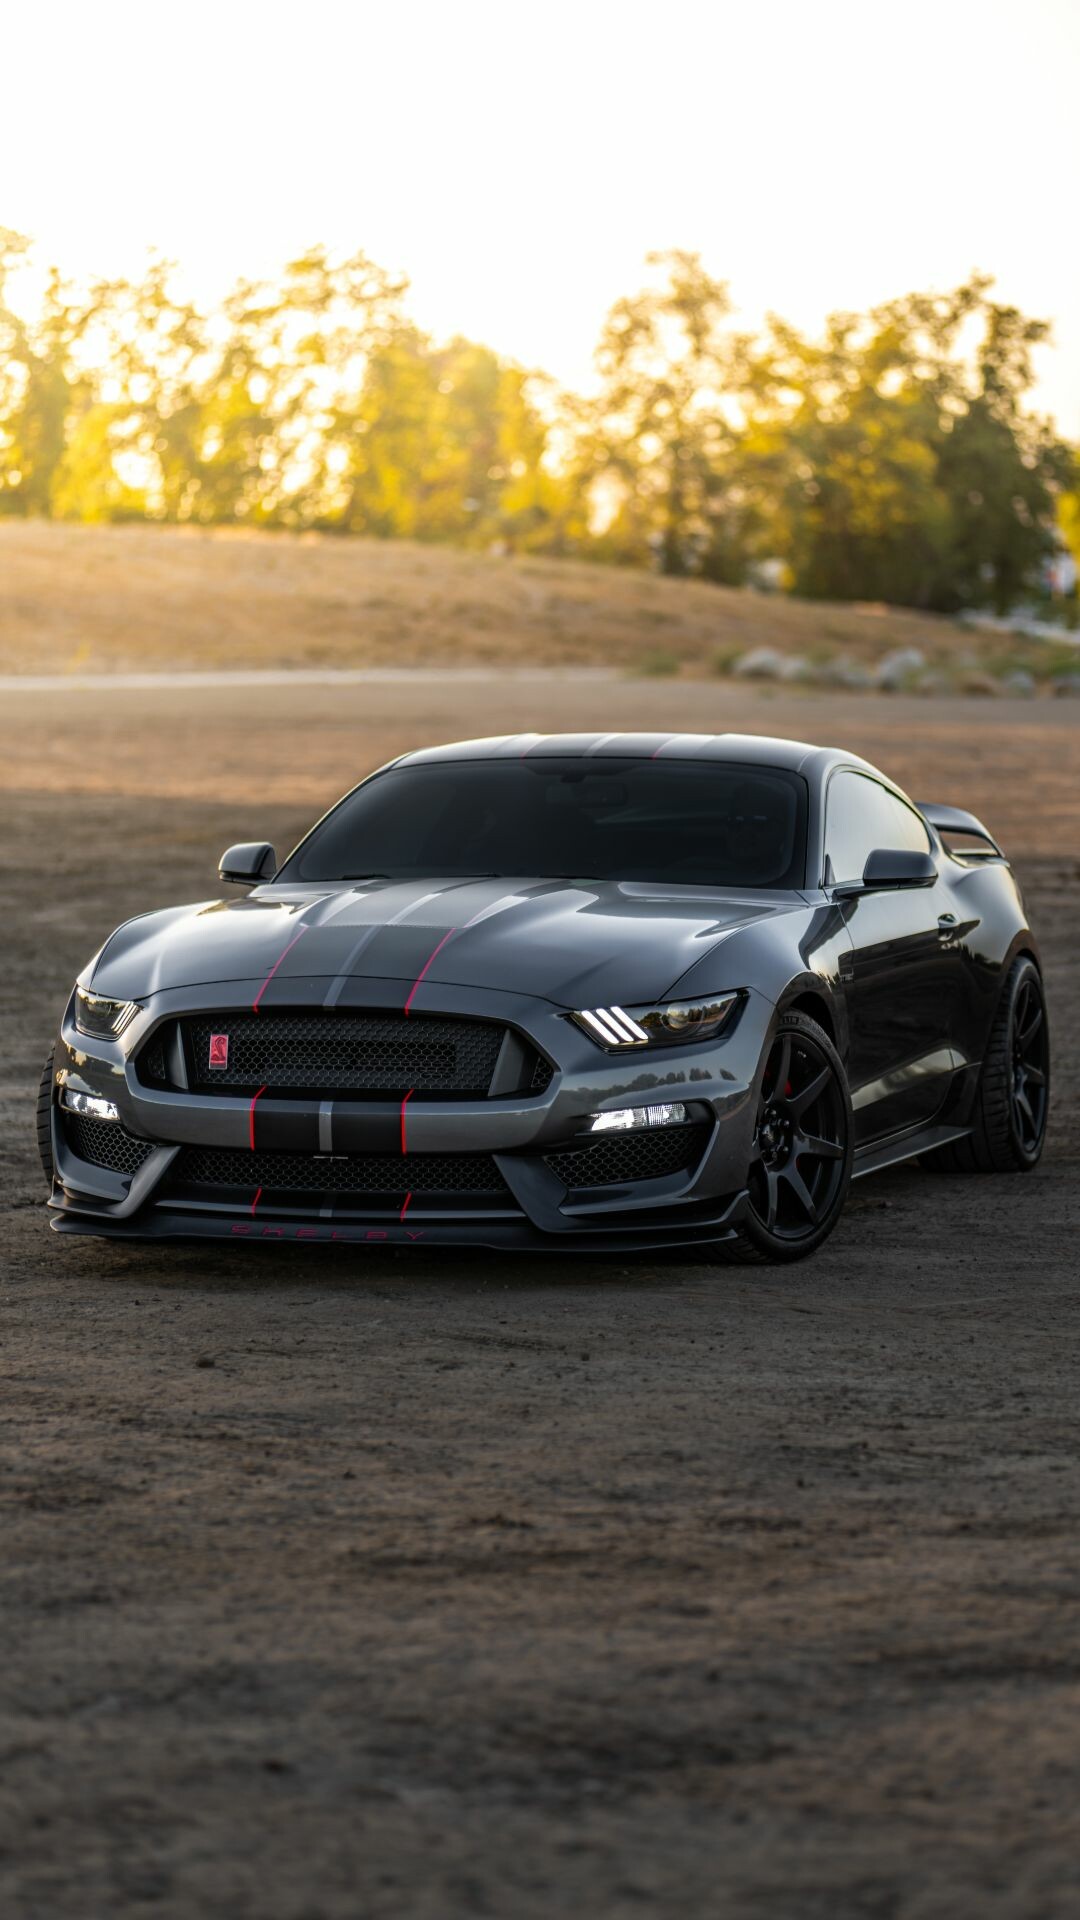 Ford: The second-largest U.S.-based automaker, behind only General Motors, Mustang. 1080x1920 Full HD Wallpaper.